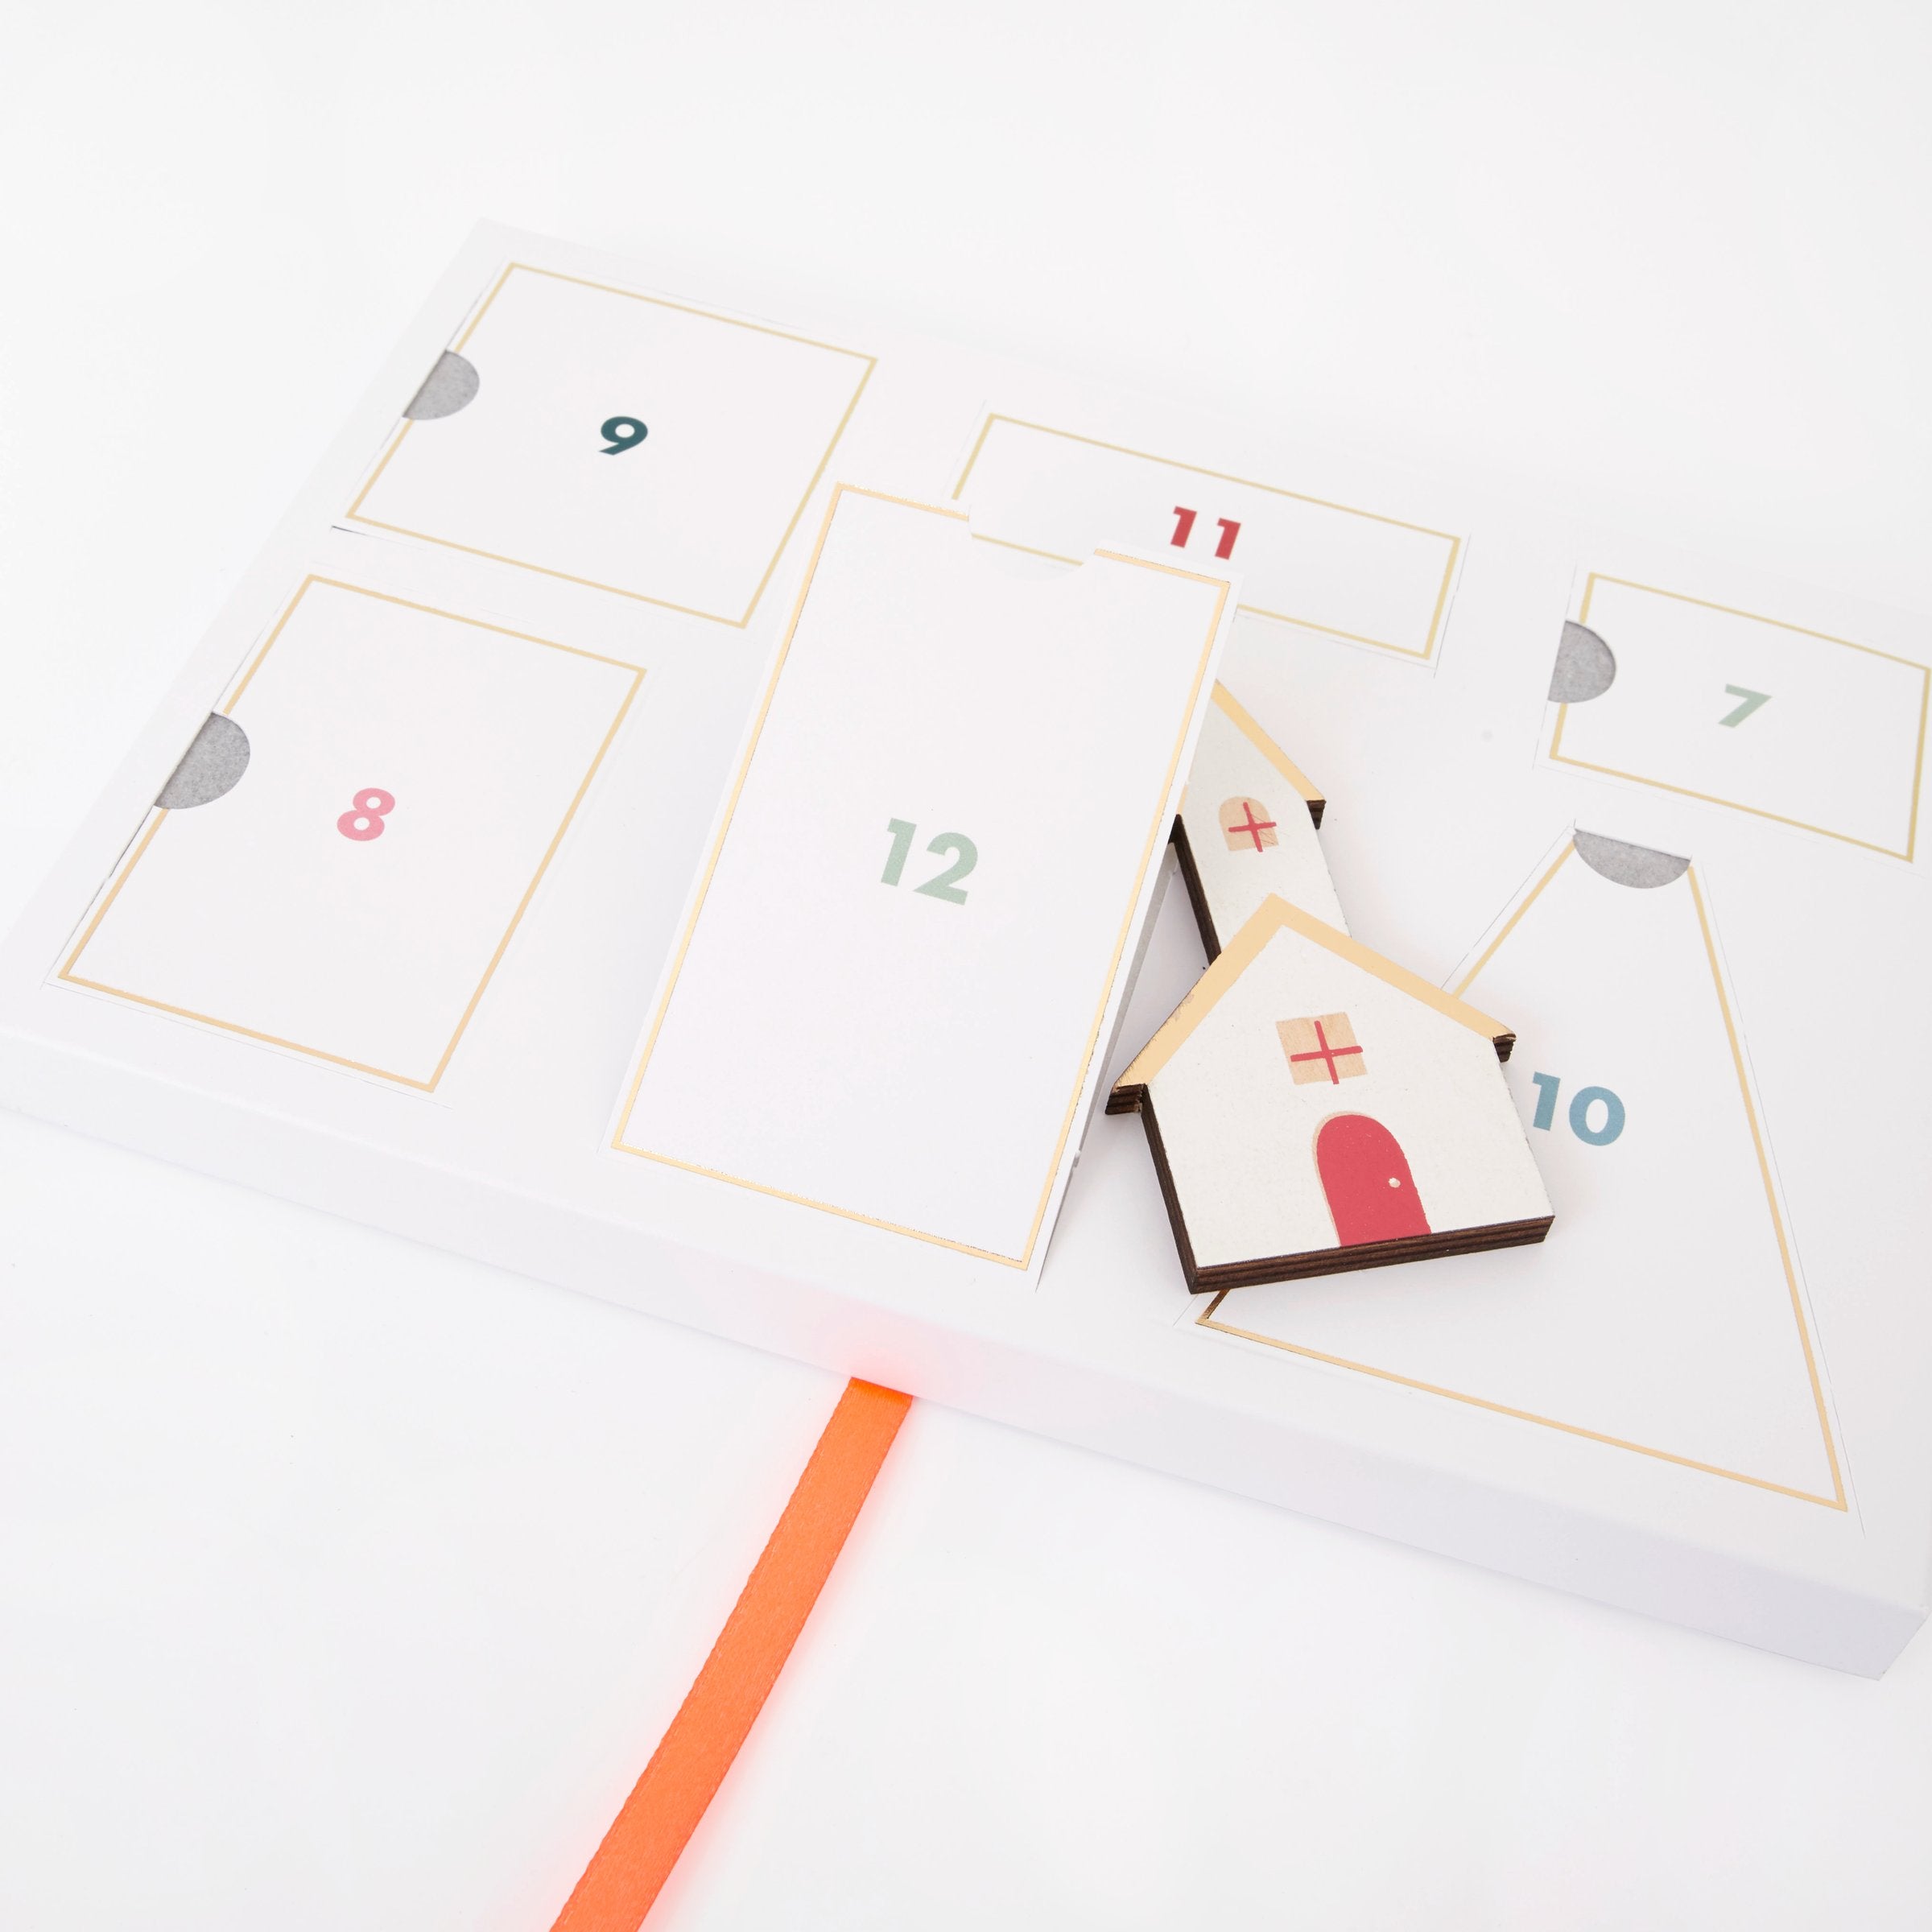 Build a Christmas village scene with our wooden advent calendar, to create a beautiful wooden Christmas decoration.